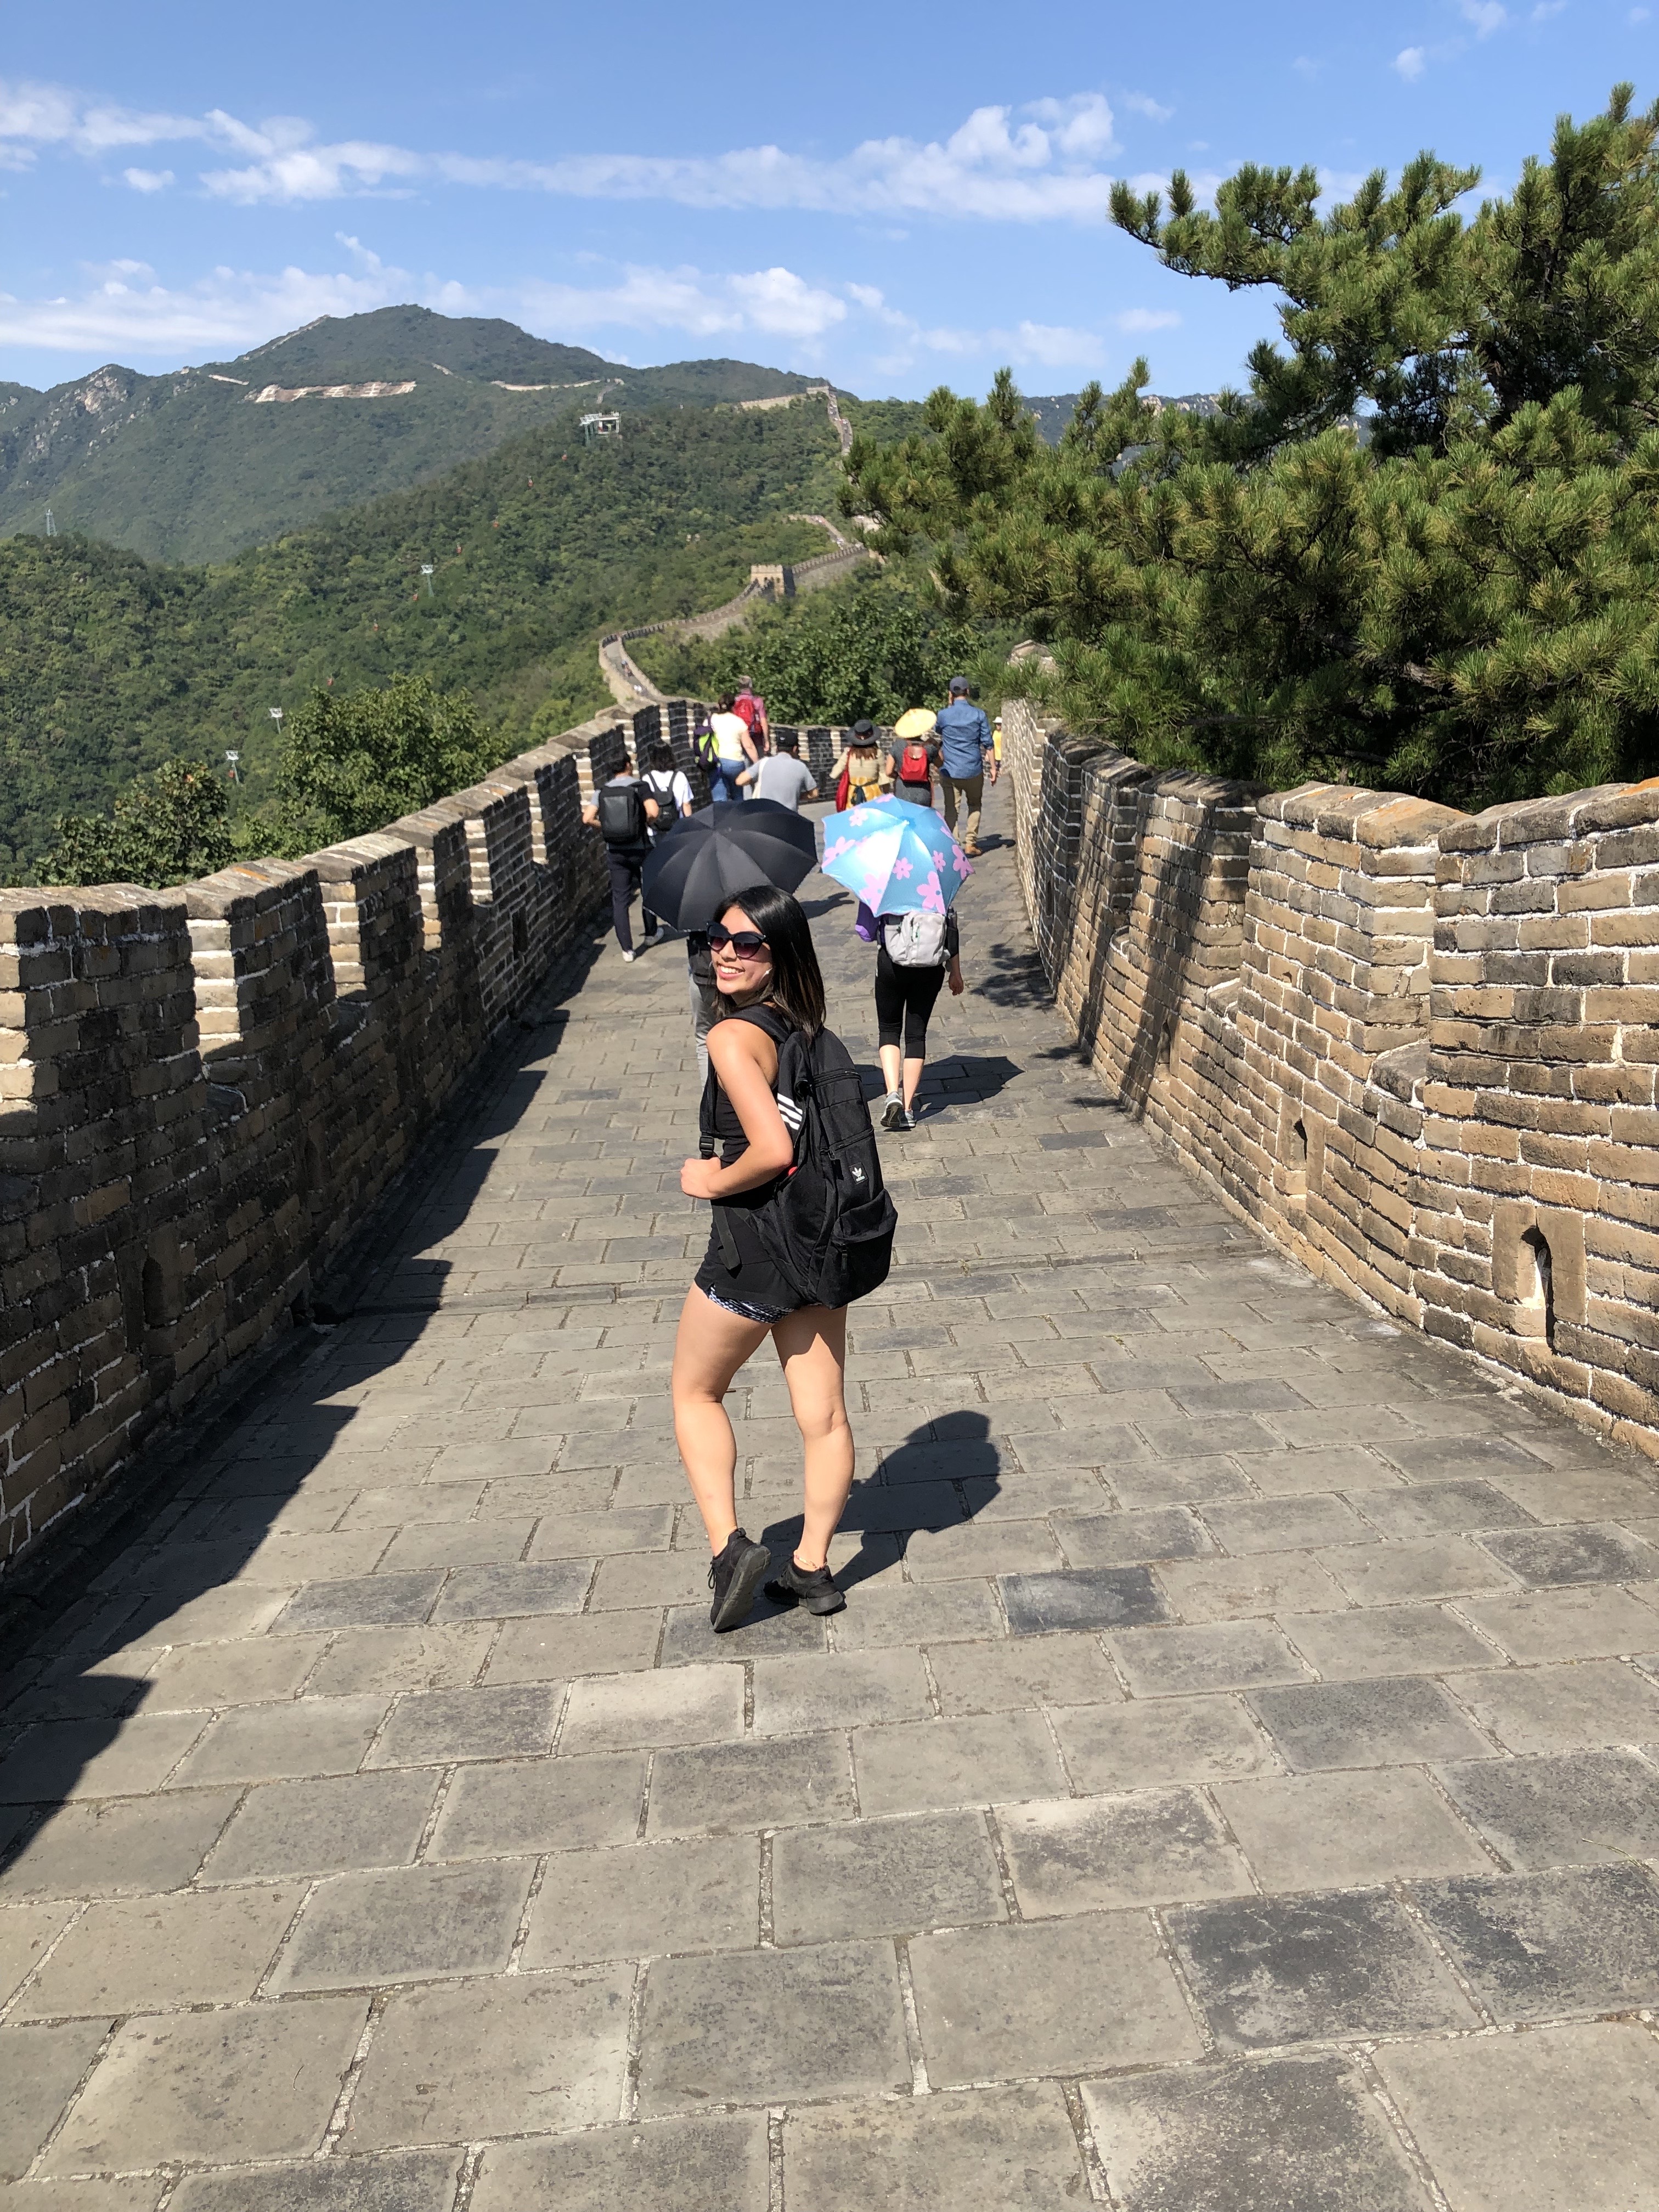 Students on the Great Wall of China